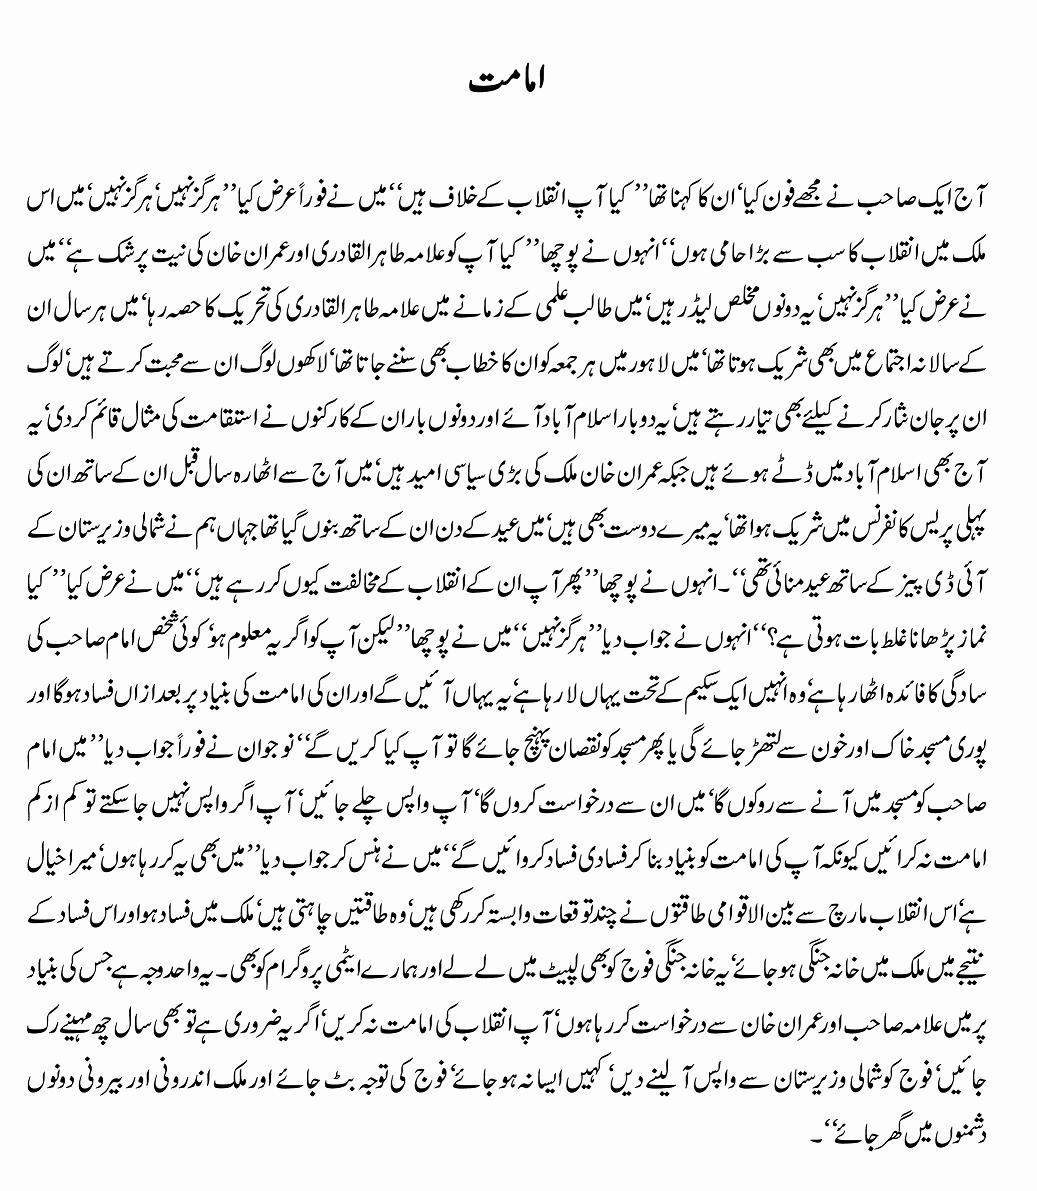 Immamat - Javed Chaudhry